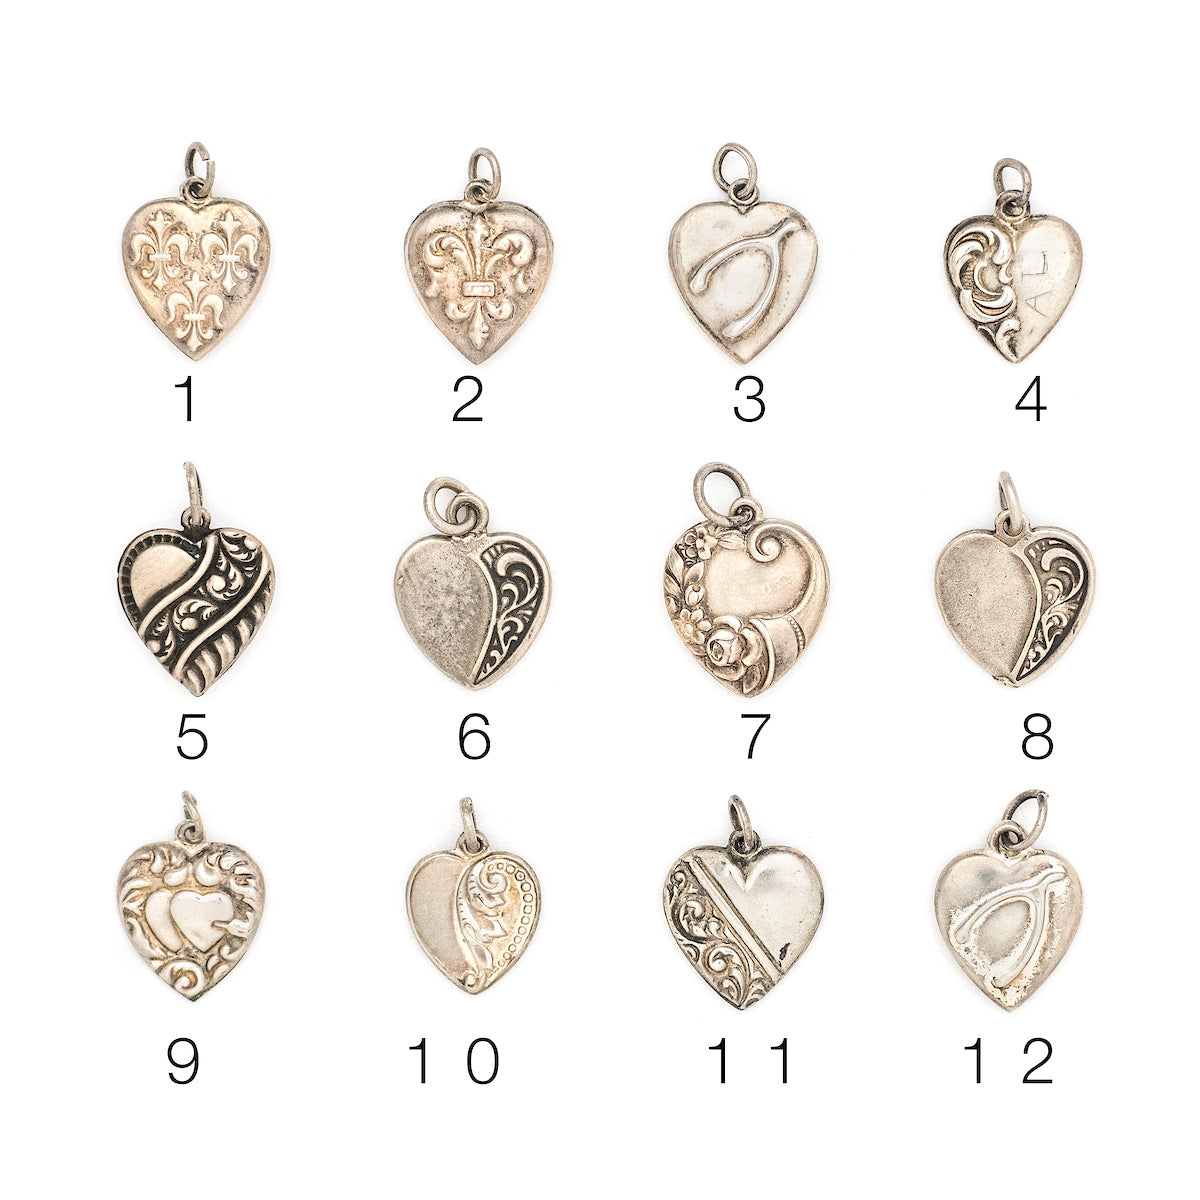 This collection of sterling silver heart charm came to us from a private collection and features something for everyone. Each charm is unique and sweet with enchanting details. Paired with one of our new silver chains, these adorable heart charms can be worn both as a pendant or in a cluster of charms. Front charm view